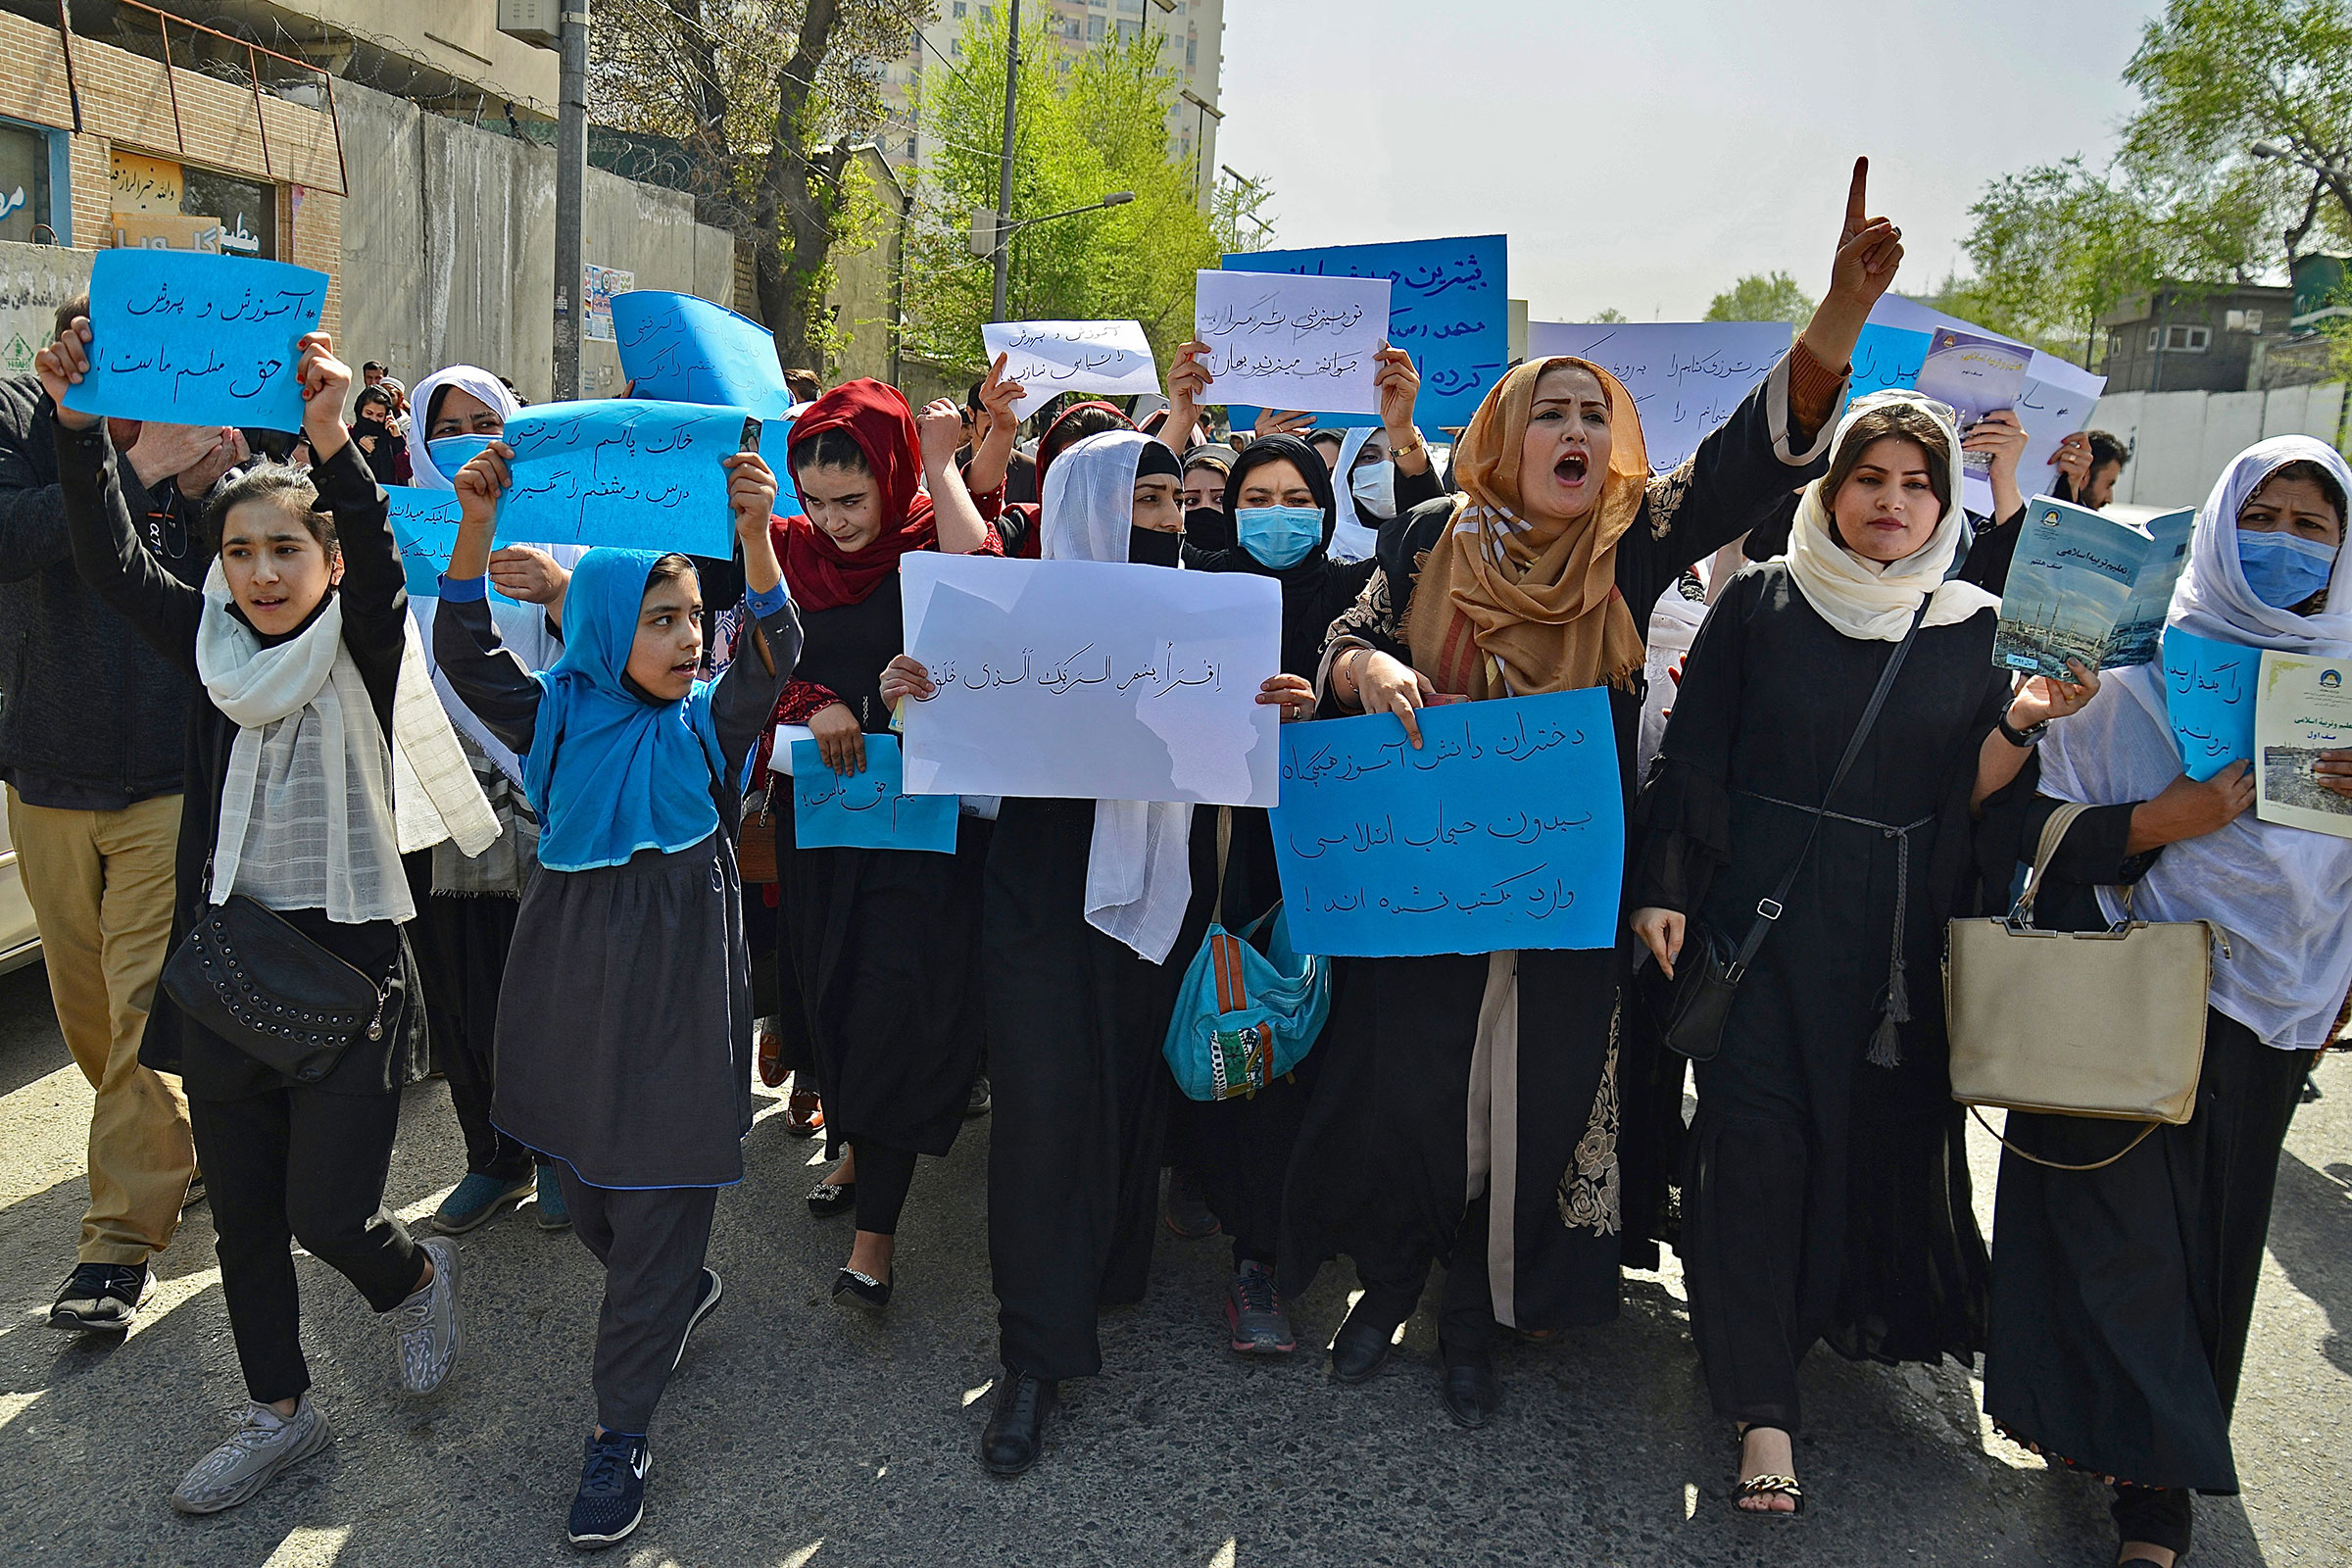 Afghan women and girls protest in front of the Ministry of Education in Kabul demanding that high schools be reopened for girls, on March 26, 2022.